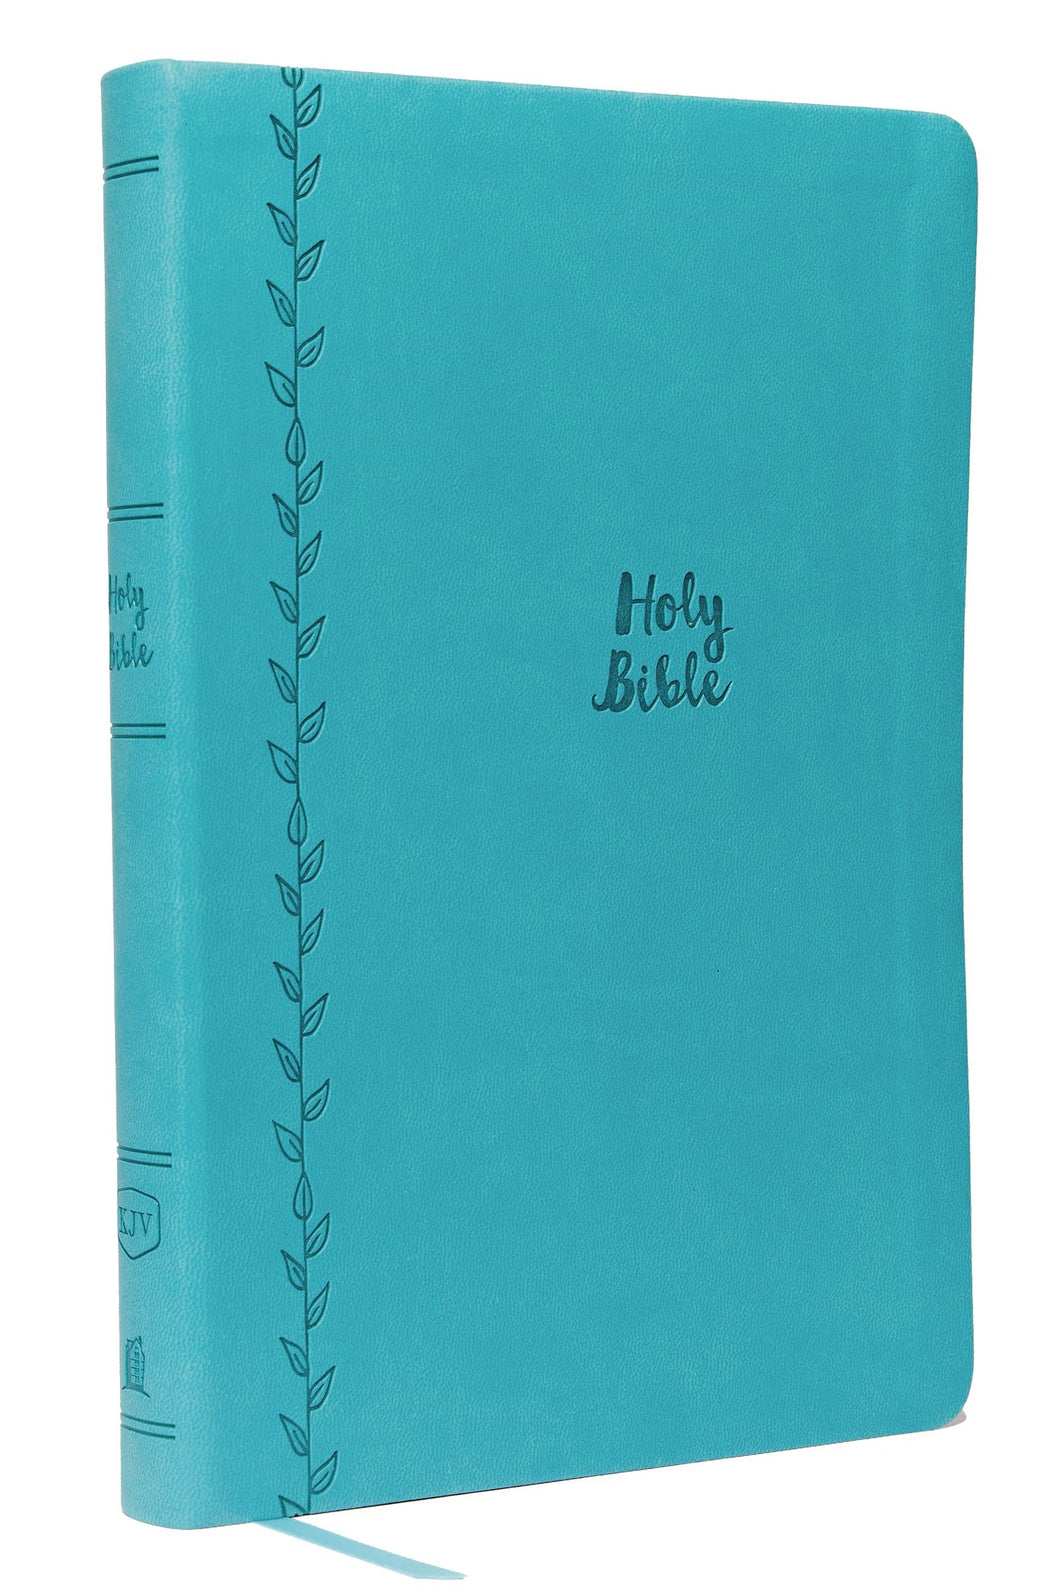 KJV Thinline Bible/Compact (Comfort Print)-Teal Leathersoft